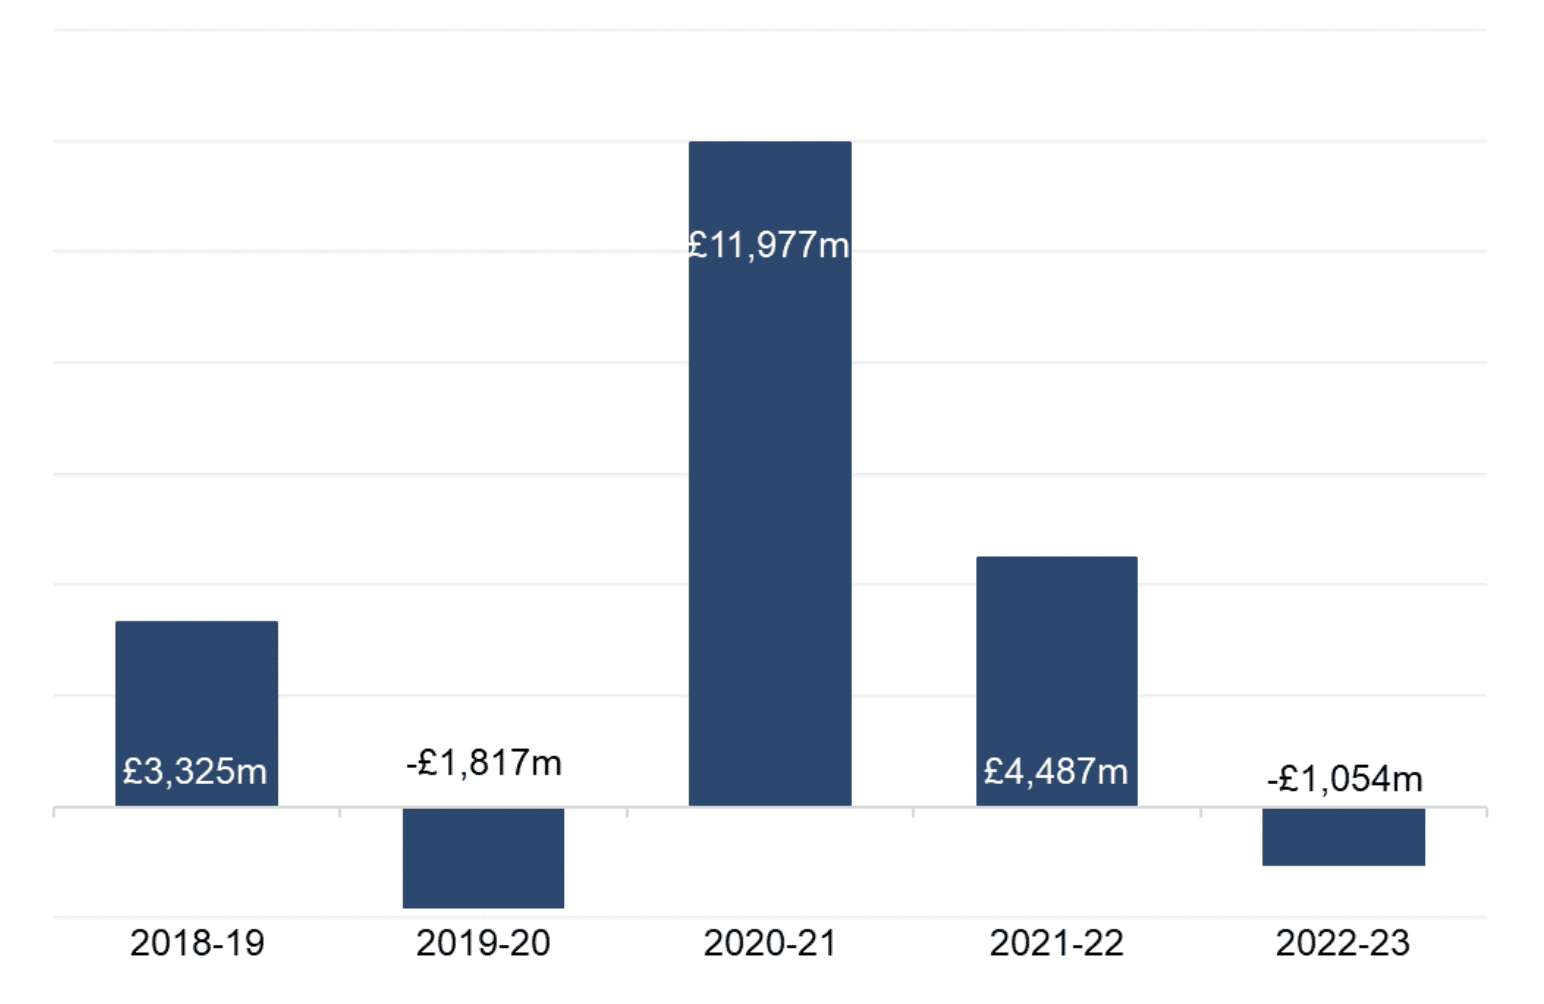 Bar chart shows the net return on investment from 2018-19 to 2022-23. In 2022-23, net return on investment was a loss of £1,054 million, a decrease of £5,541 million from 2021-22. The negative net return in 2019-20 reflected the impact of the Covid-19 pandemic on financial markets at the start of 2020 and the corresponding decrease in pension investments across all local authorities. The variation in net return on investment between years reflects the volatility of this figure.